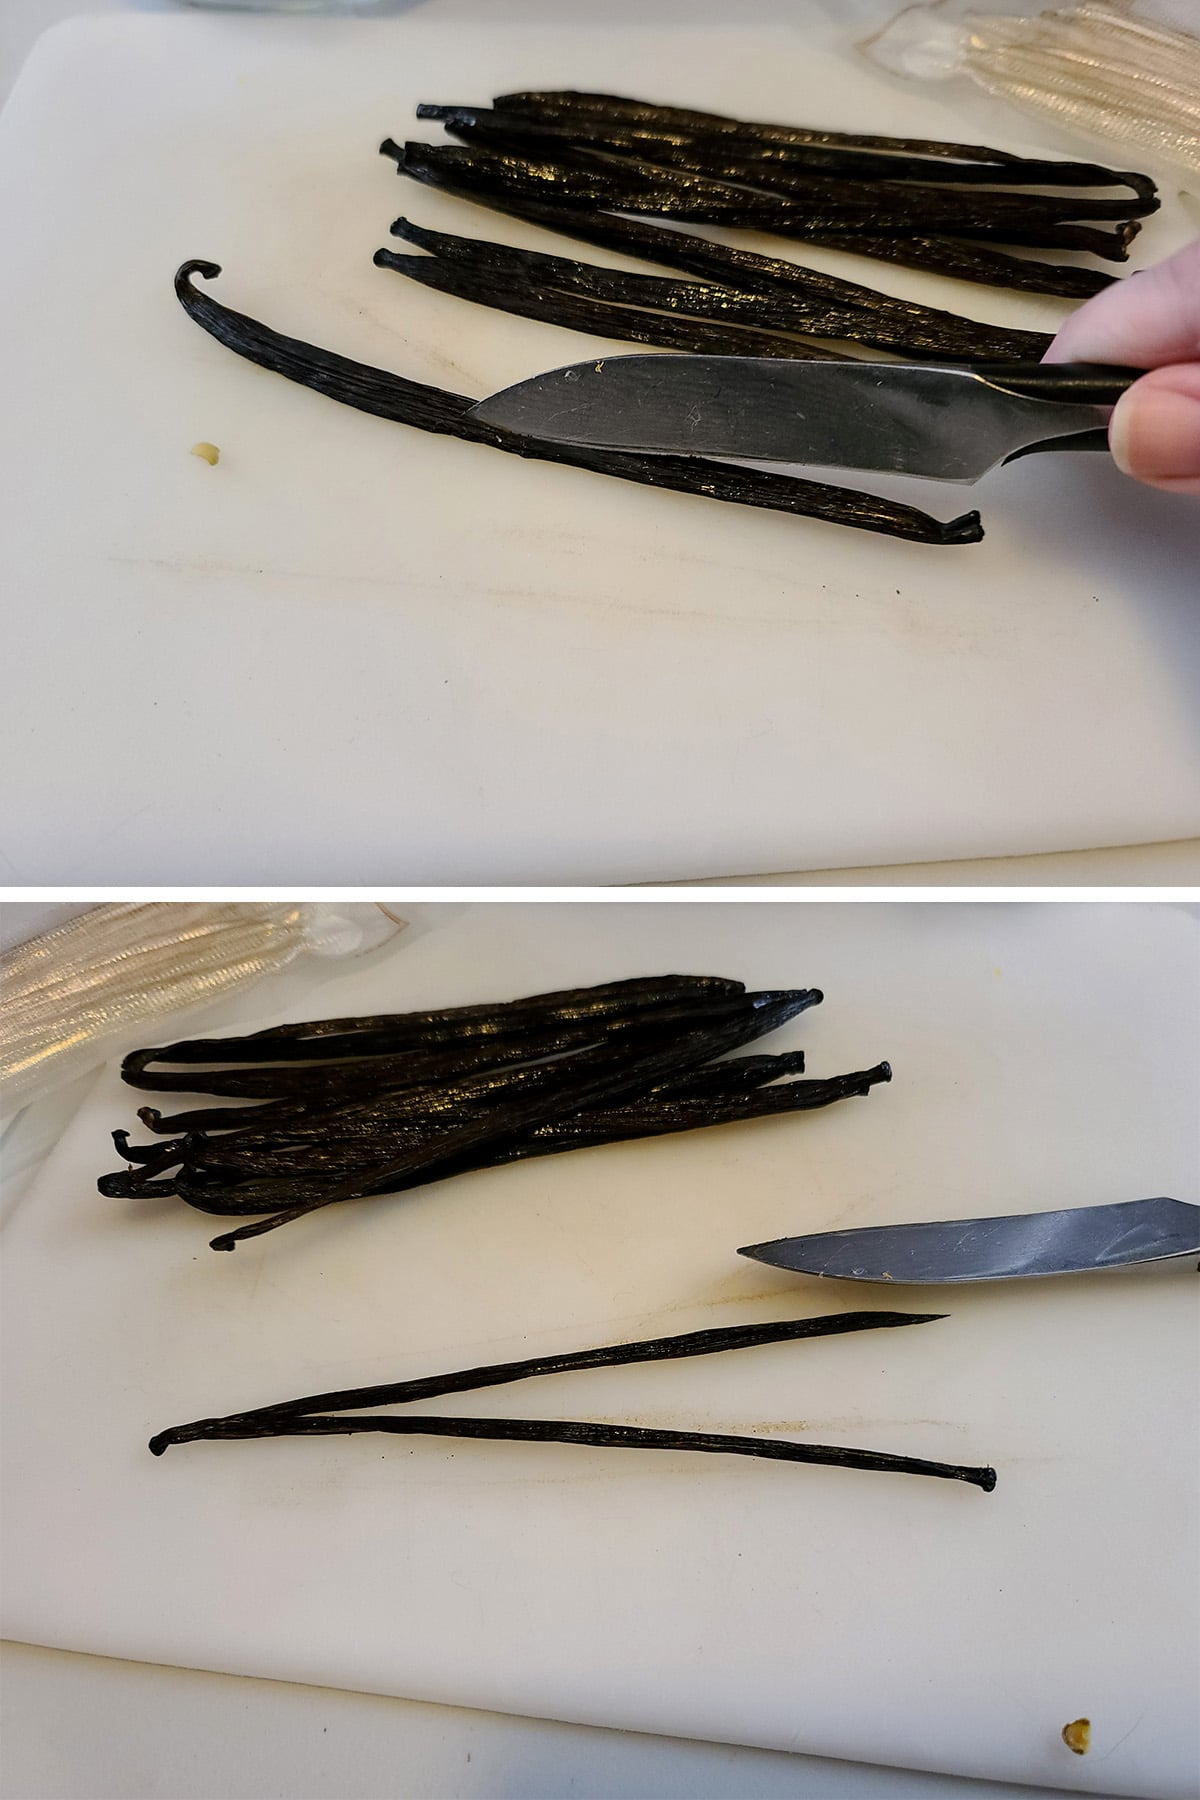 A paring knife is shown splitting a vanilla bean up the length of it.